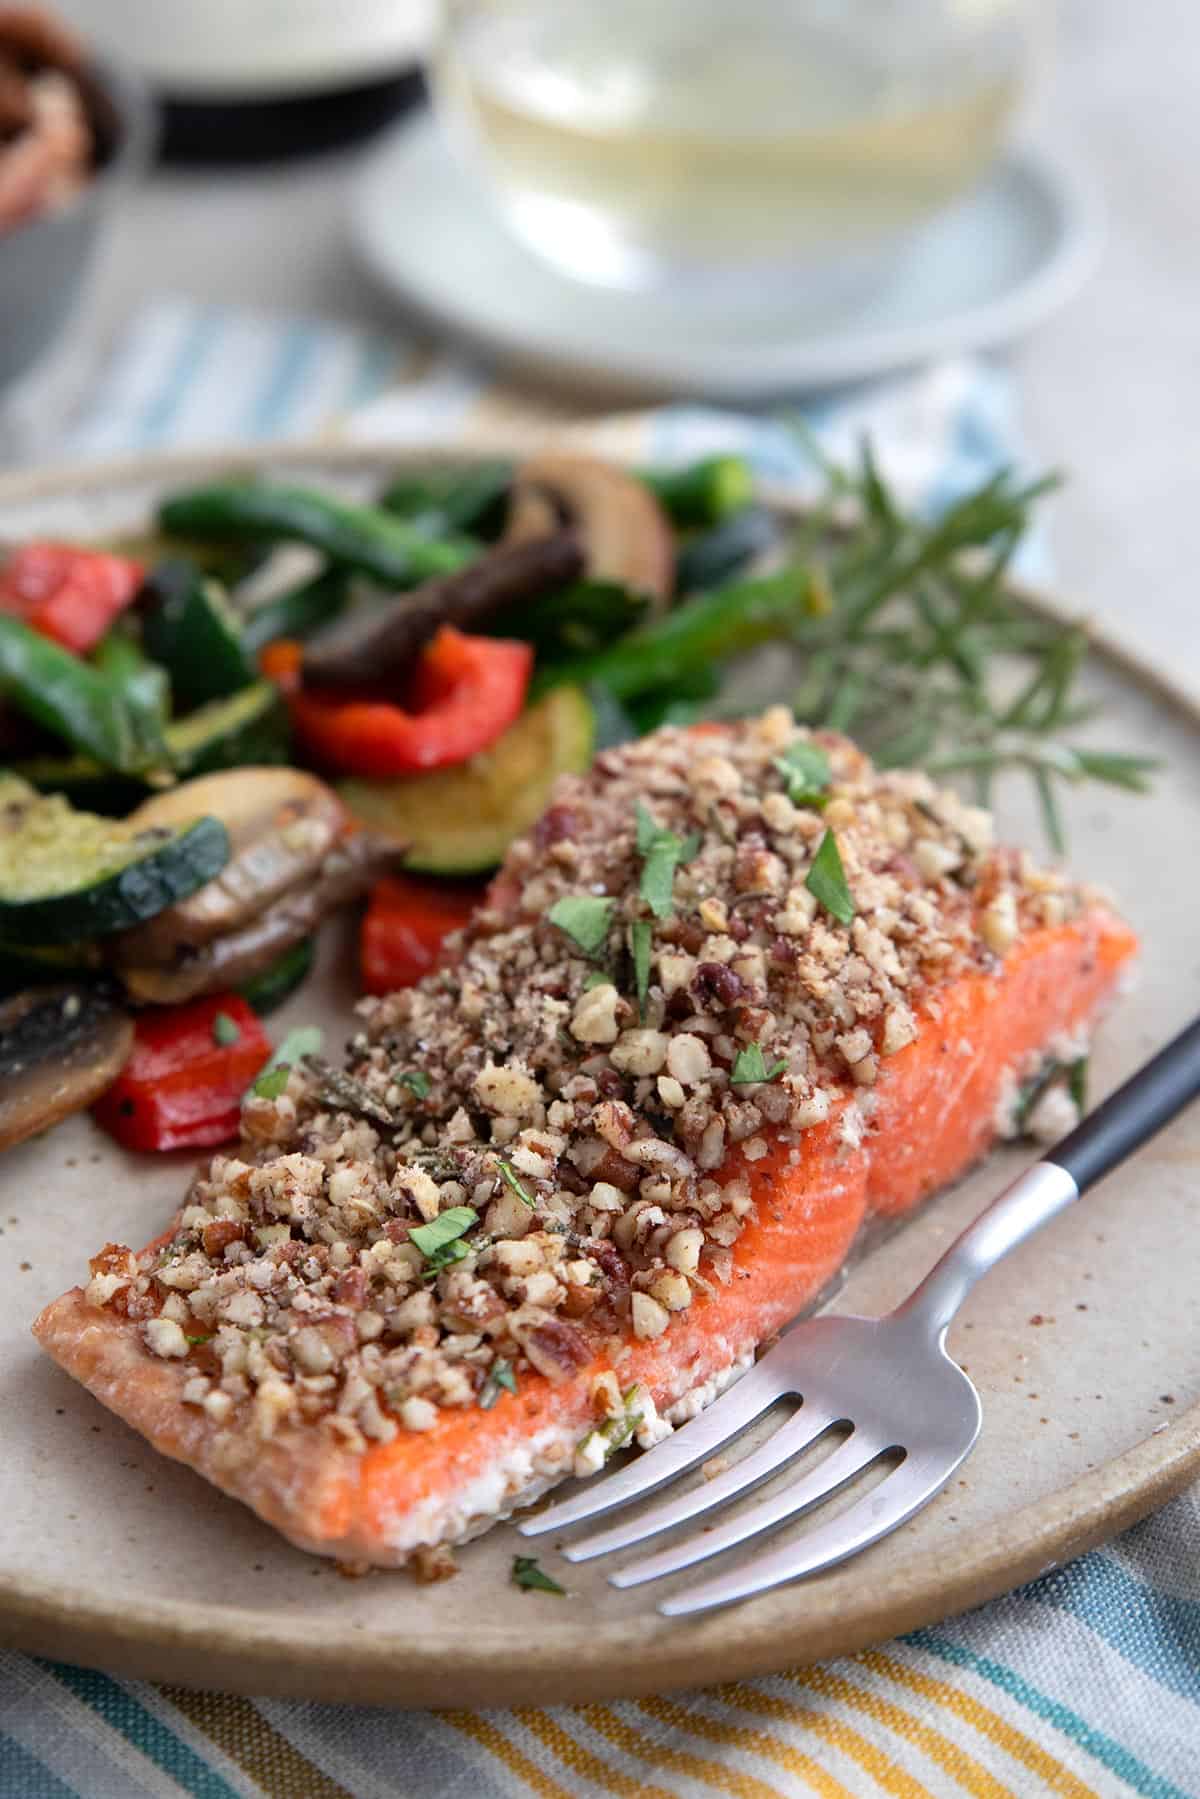 A serving of Pecan Crusted Salmon on a plate with sautéed veggies.